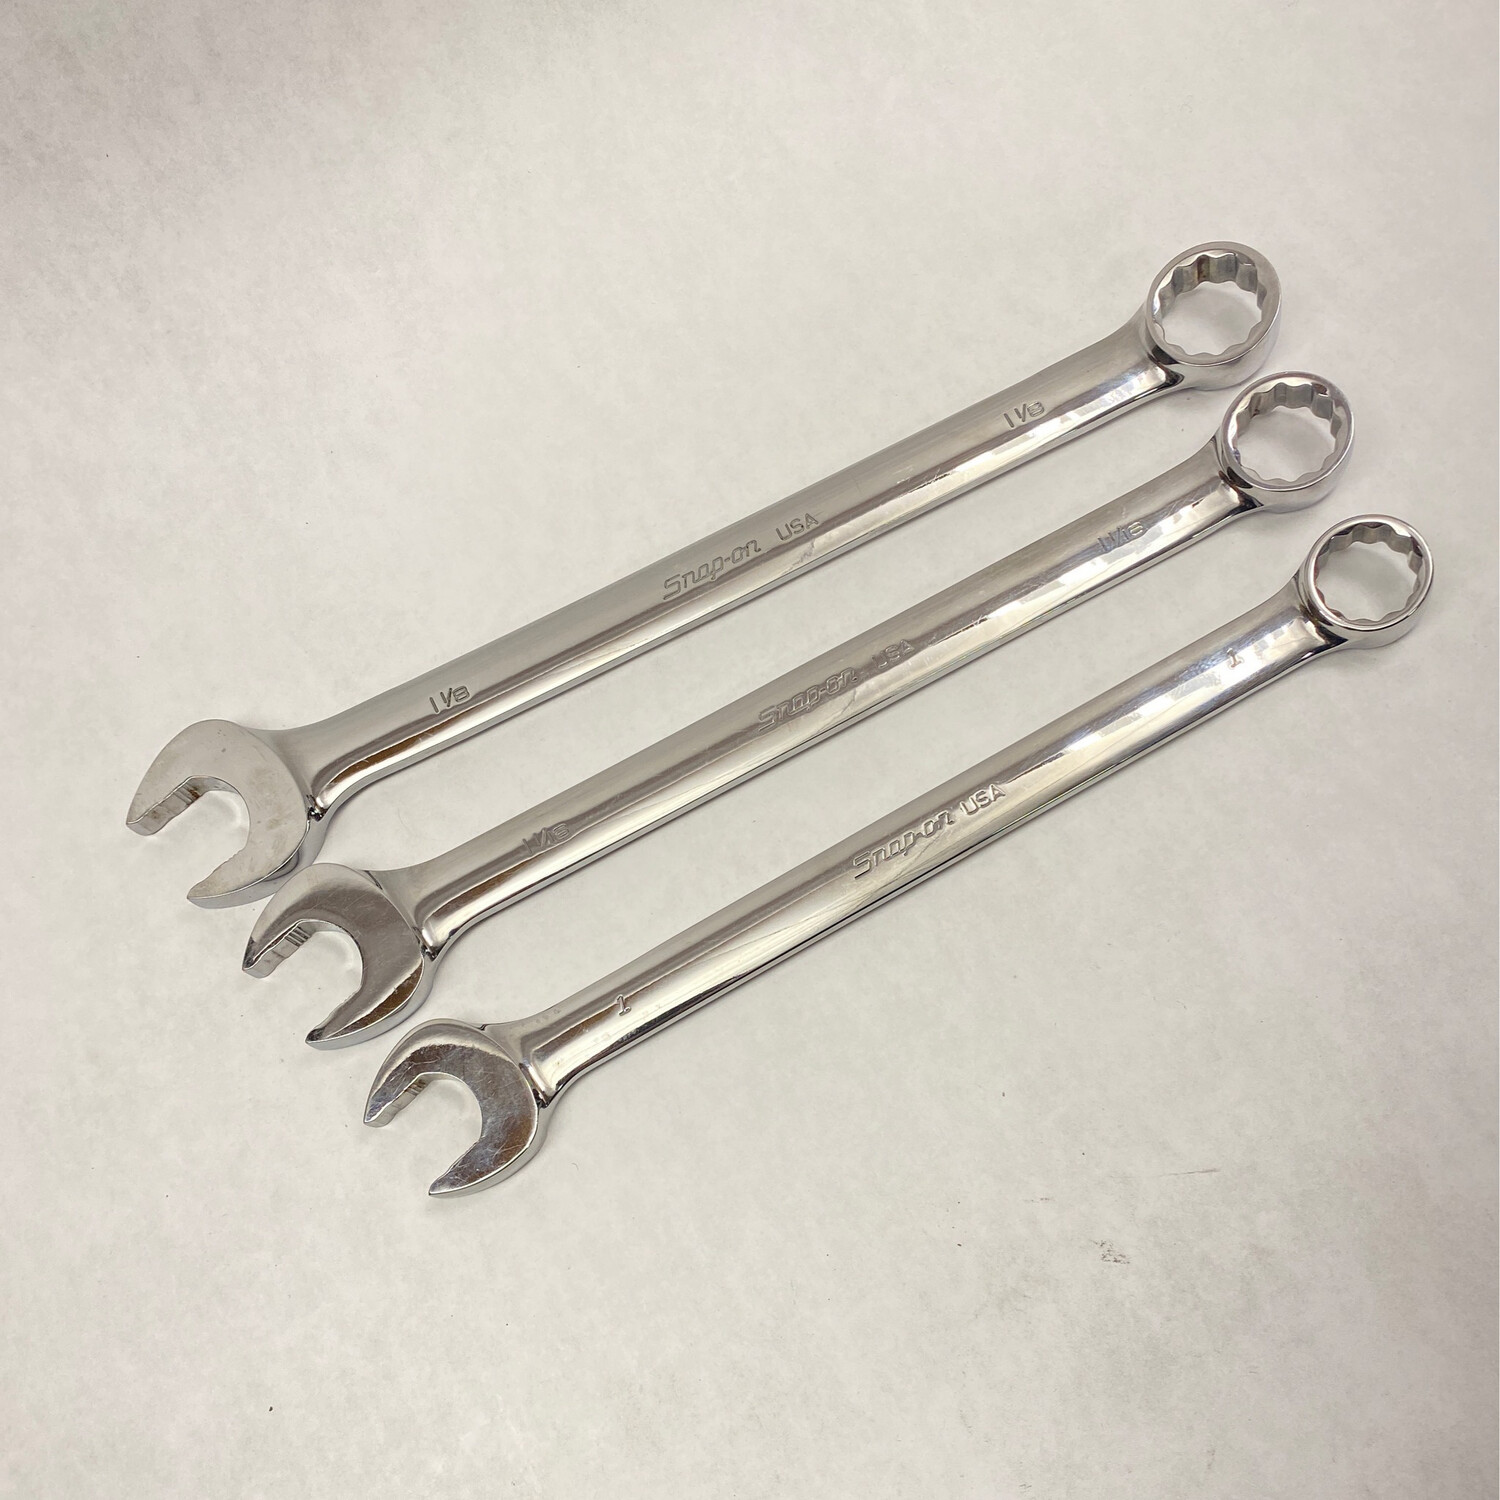 Snap on 3 Pc. 12 Pt SAE Flank Drive Plus Combination Wrench Set, SOEX704